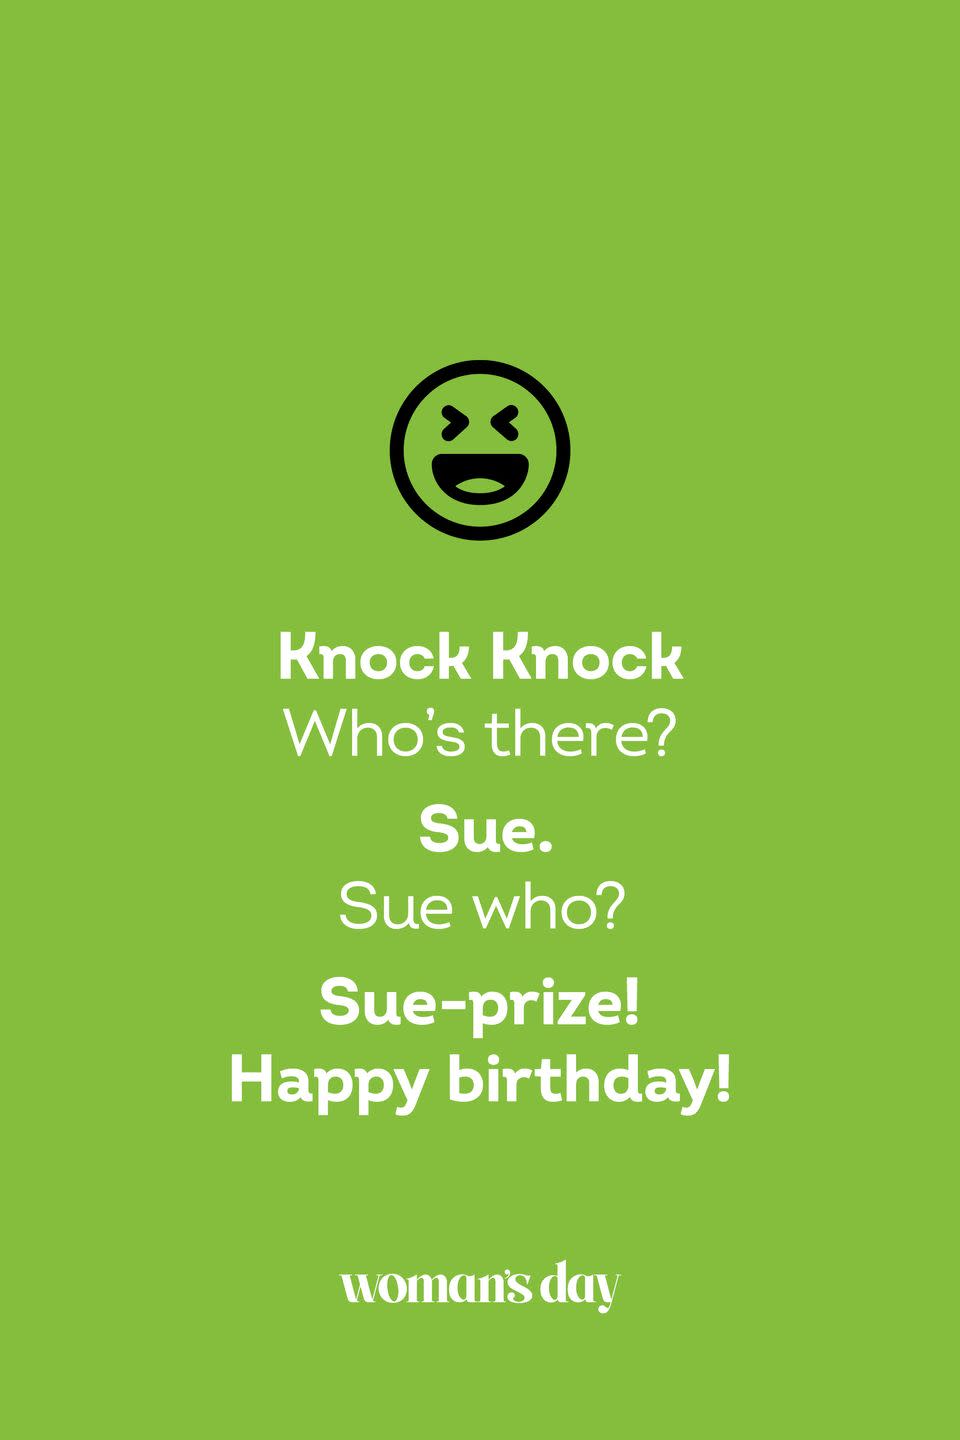 <p><strong>Knock knock.</strong></p><p><em>Who’s there?</em></p><p><strong>Sue.</strong></p><p><em>Sue who?</em></p><p><strong>Sue-prize! Happy birthday!</strong></p>